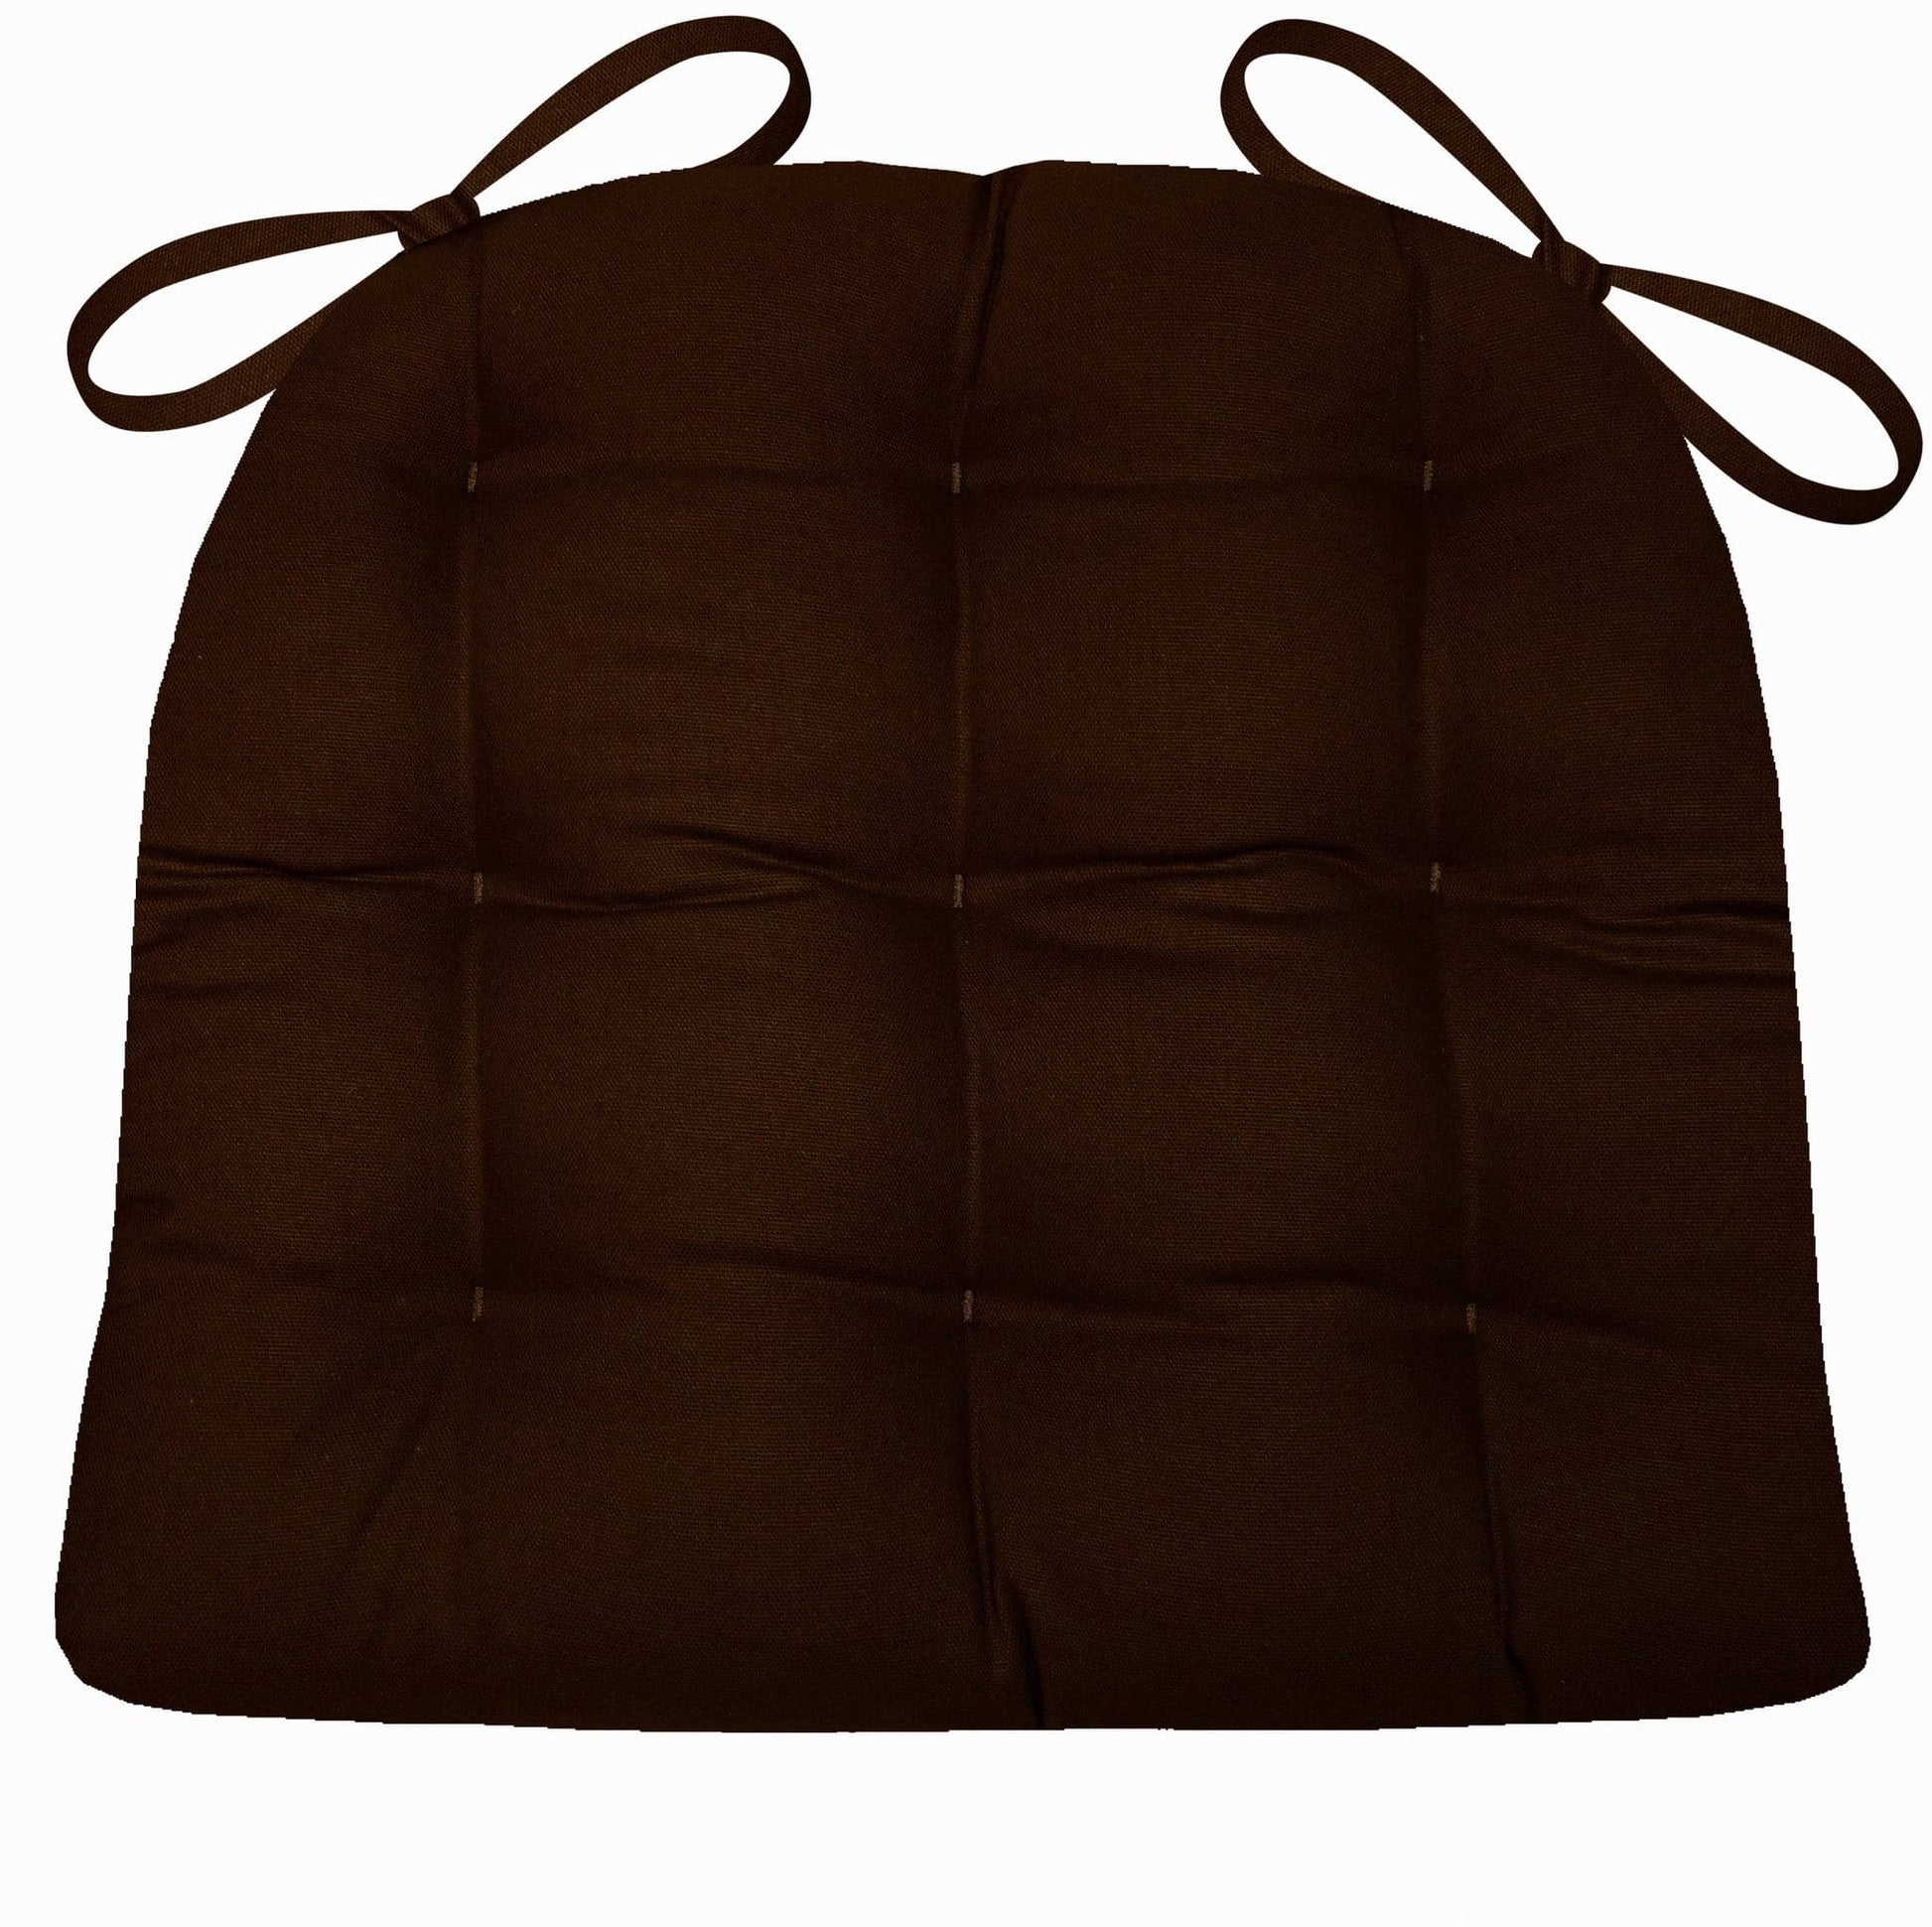 Woodlands Fish Camp Chair Cushion Reverse to Microsuede Brown